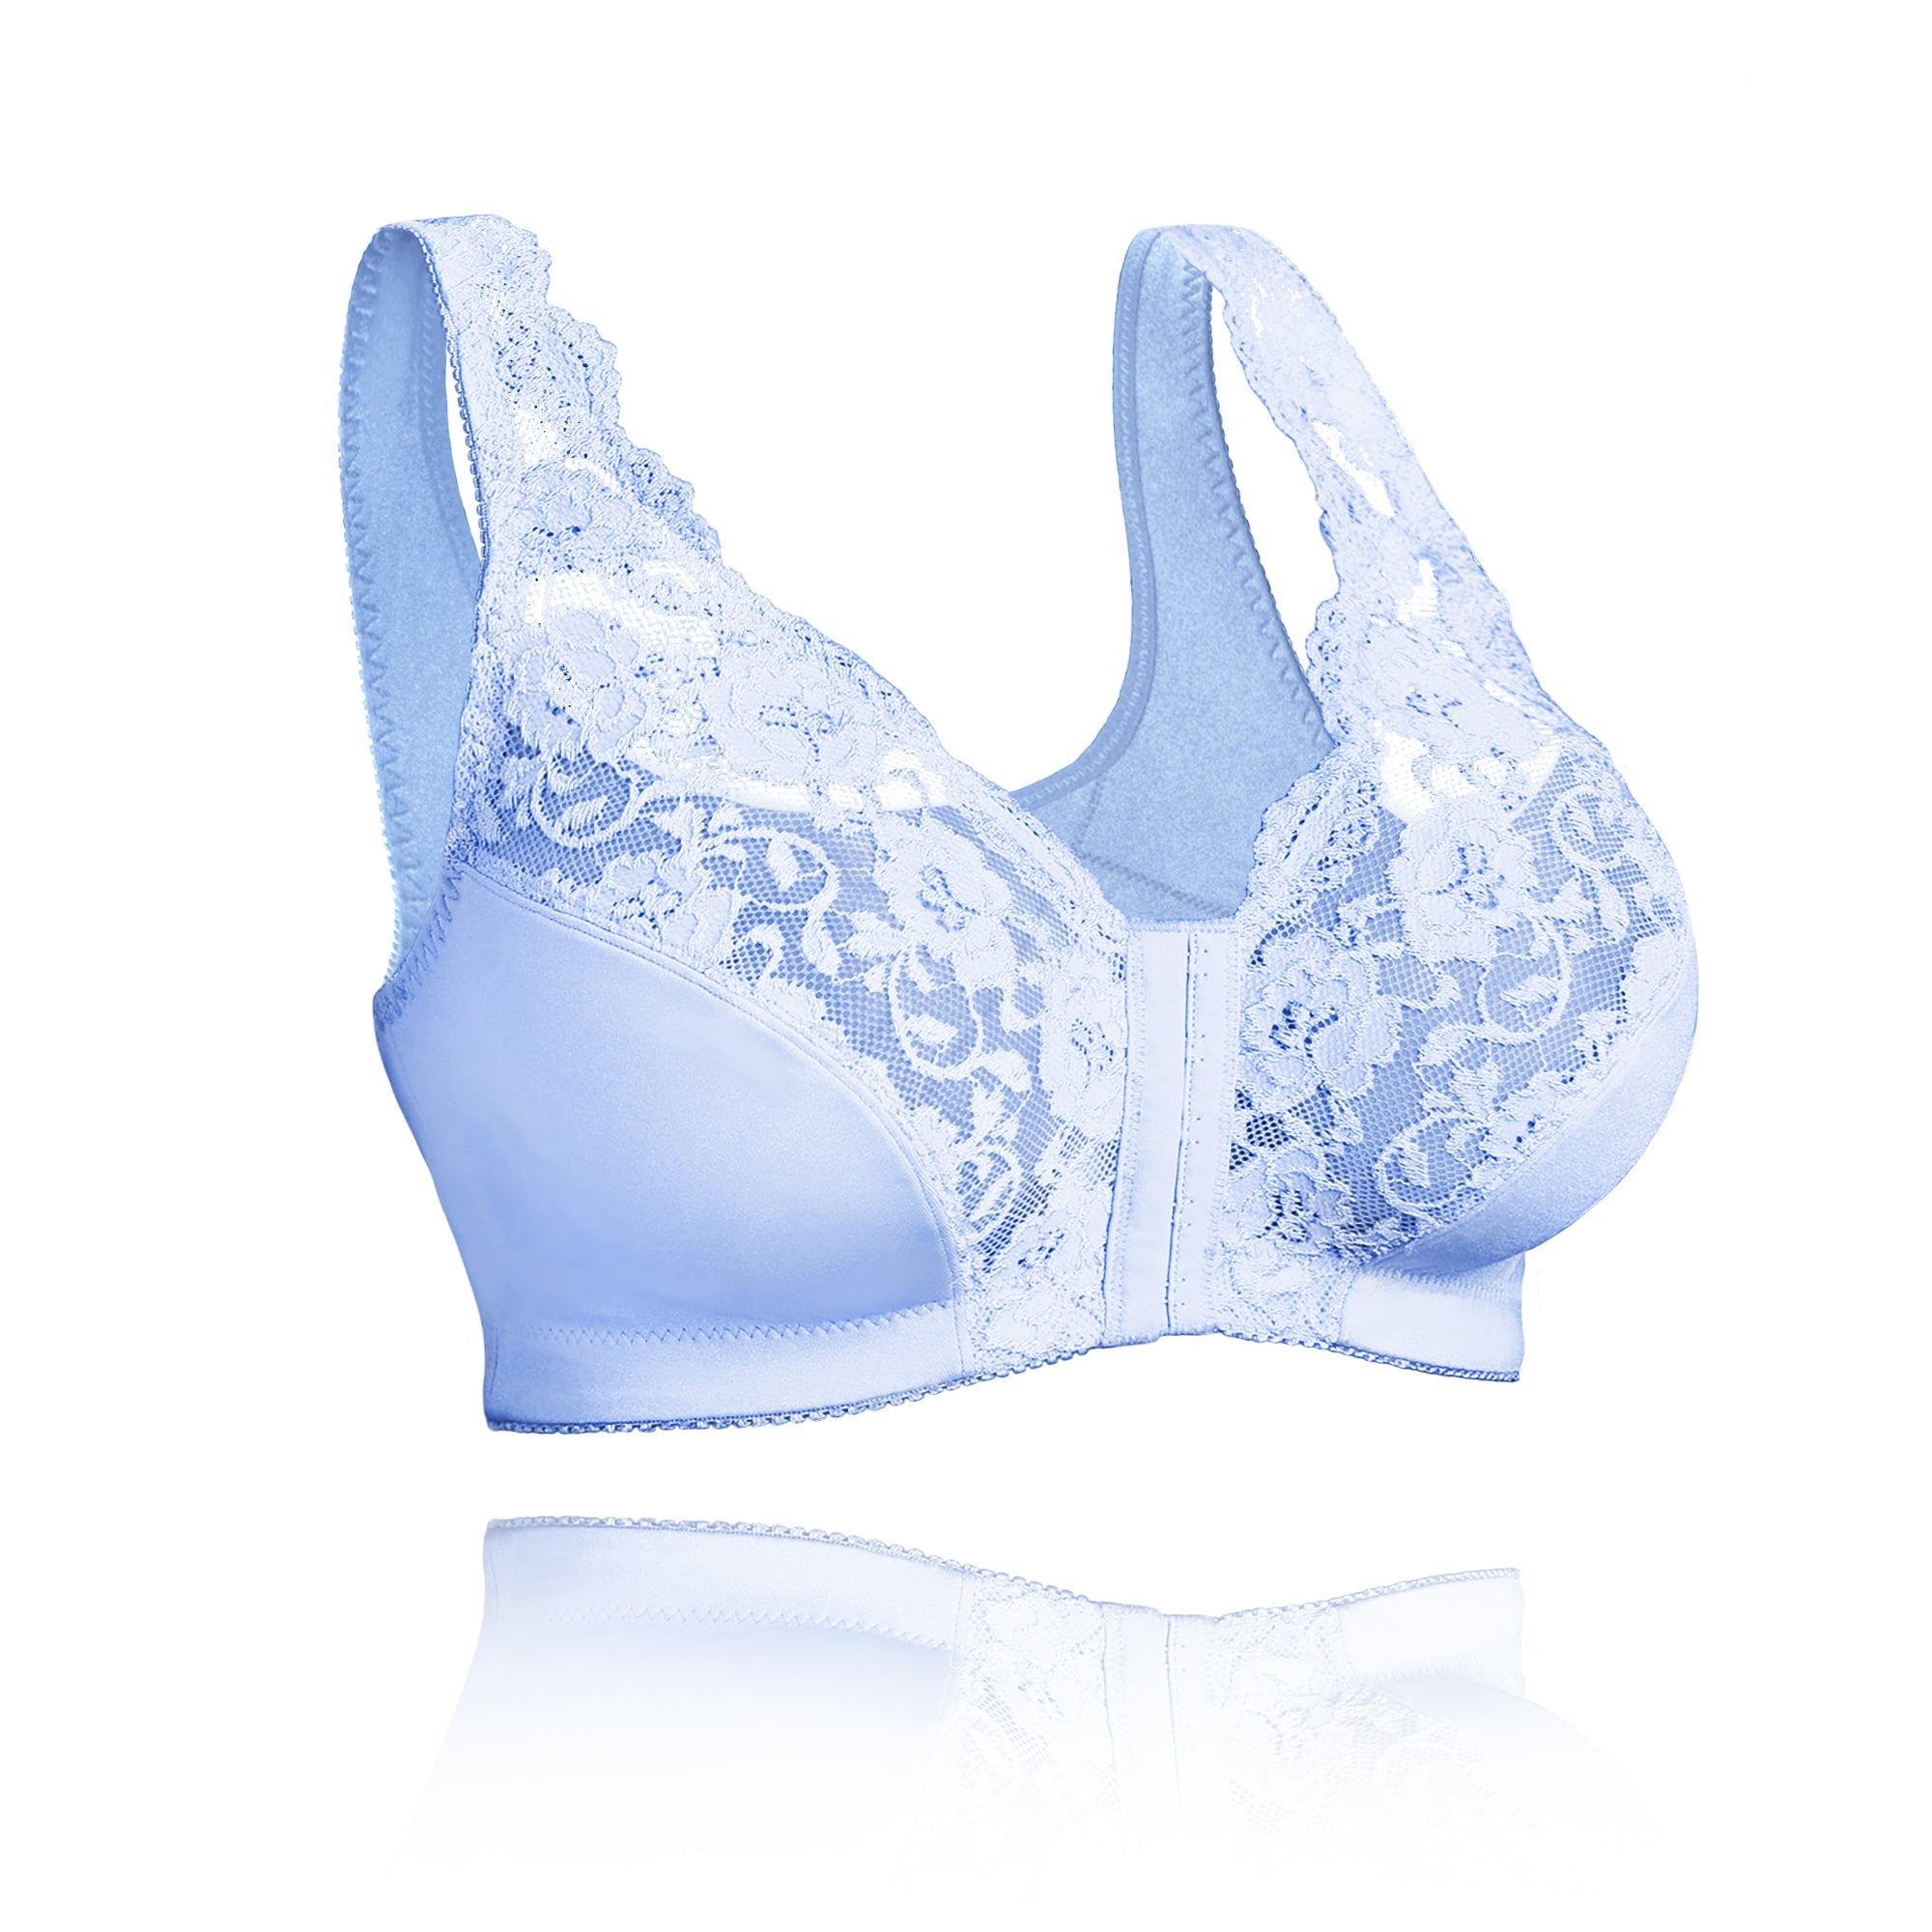 All in One Bra - Front Hooks, Stretch-Lace, Super-Lift, Front